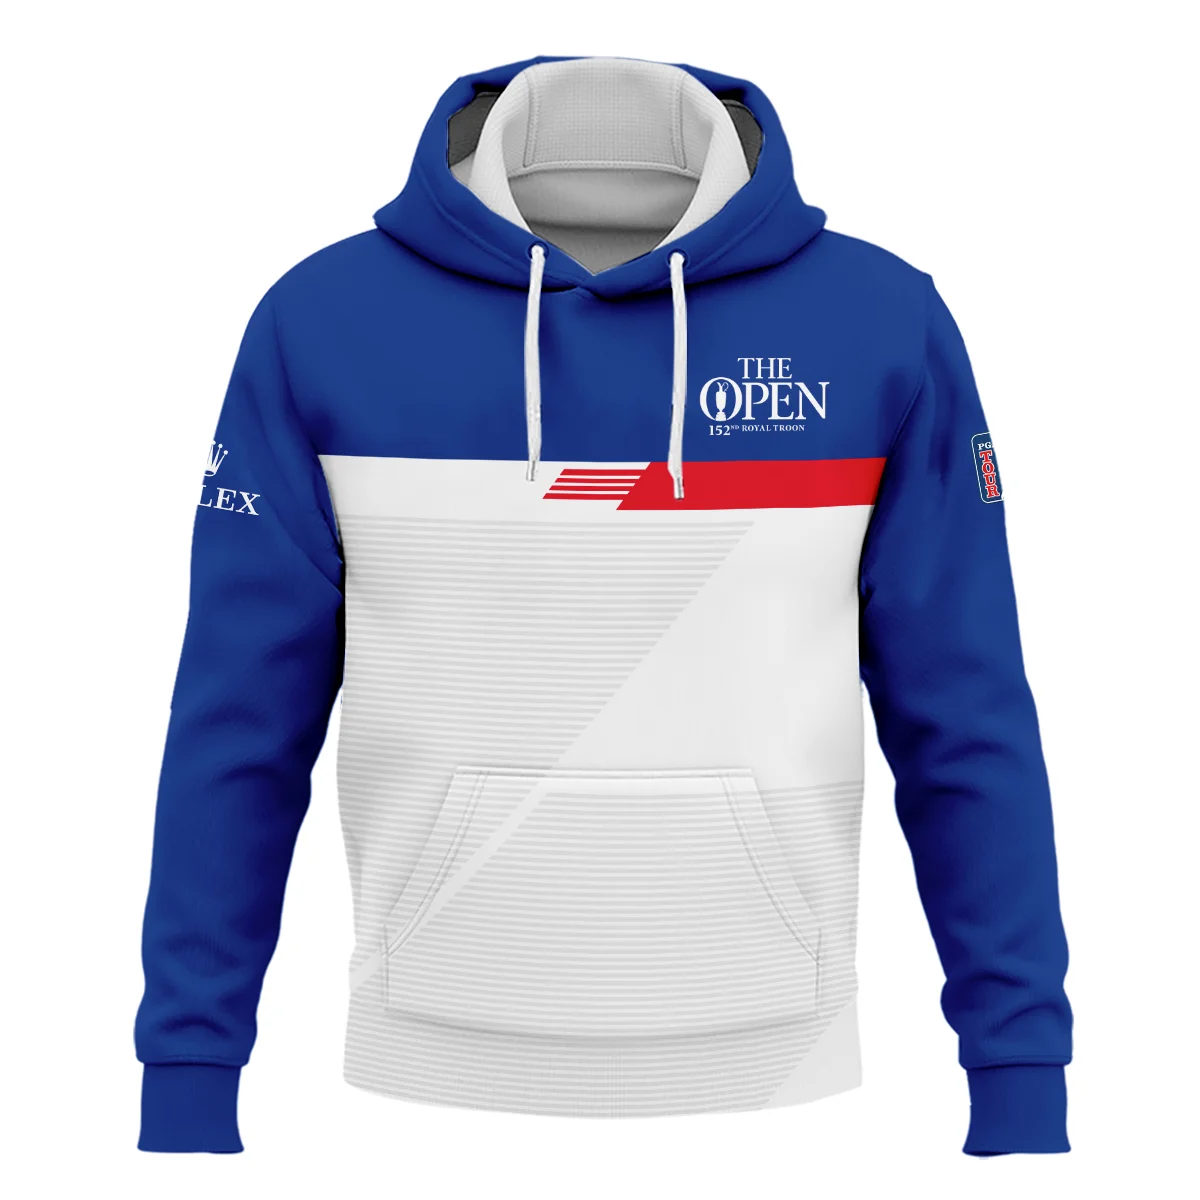 152nd Open Championship Golf Blue Red White Line Pattern Background Rolex Performance Quarter Zip Sweatshirt With Pockets All Over Prints HOTOP260624A01ROXTS